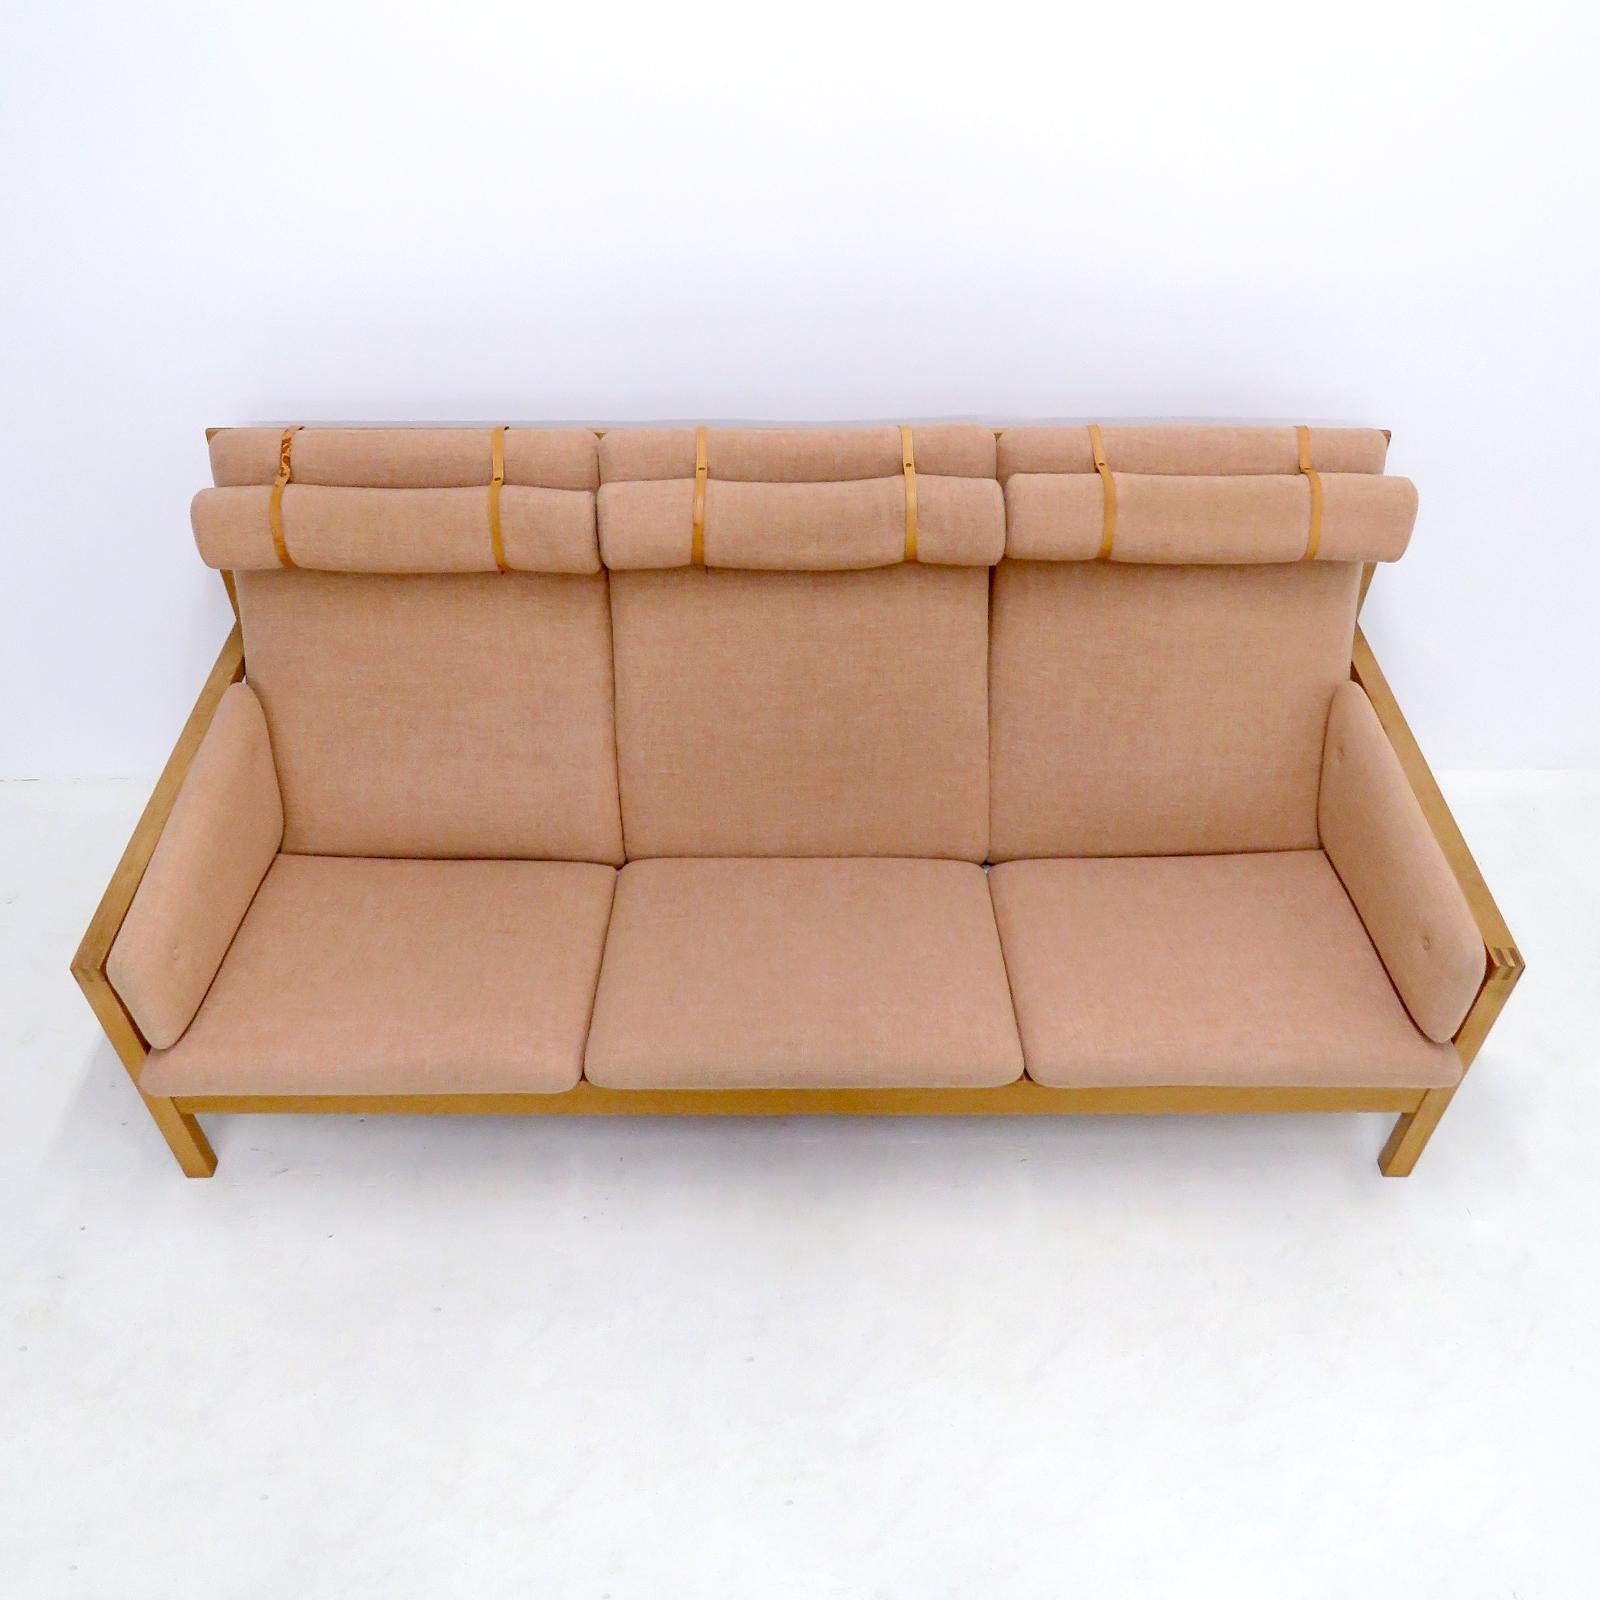 Stunning three-seat sofa model no. 2253, designed by Børge Mogensen in 1963 and produced by Frederica Stolefabrik, Denmark, in original salmon colored wool with leather straps on an oak wood frame, marked.
Provenance: private collection of Børge